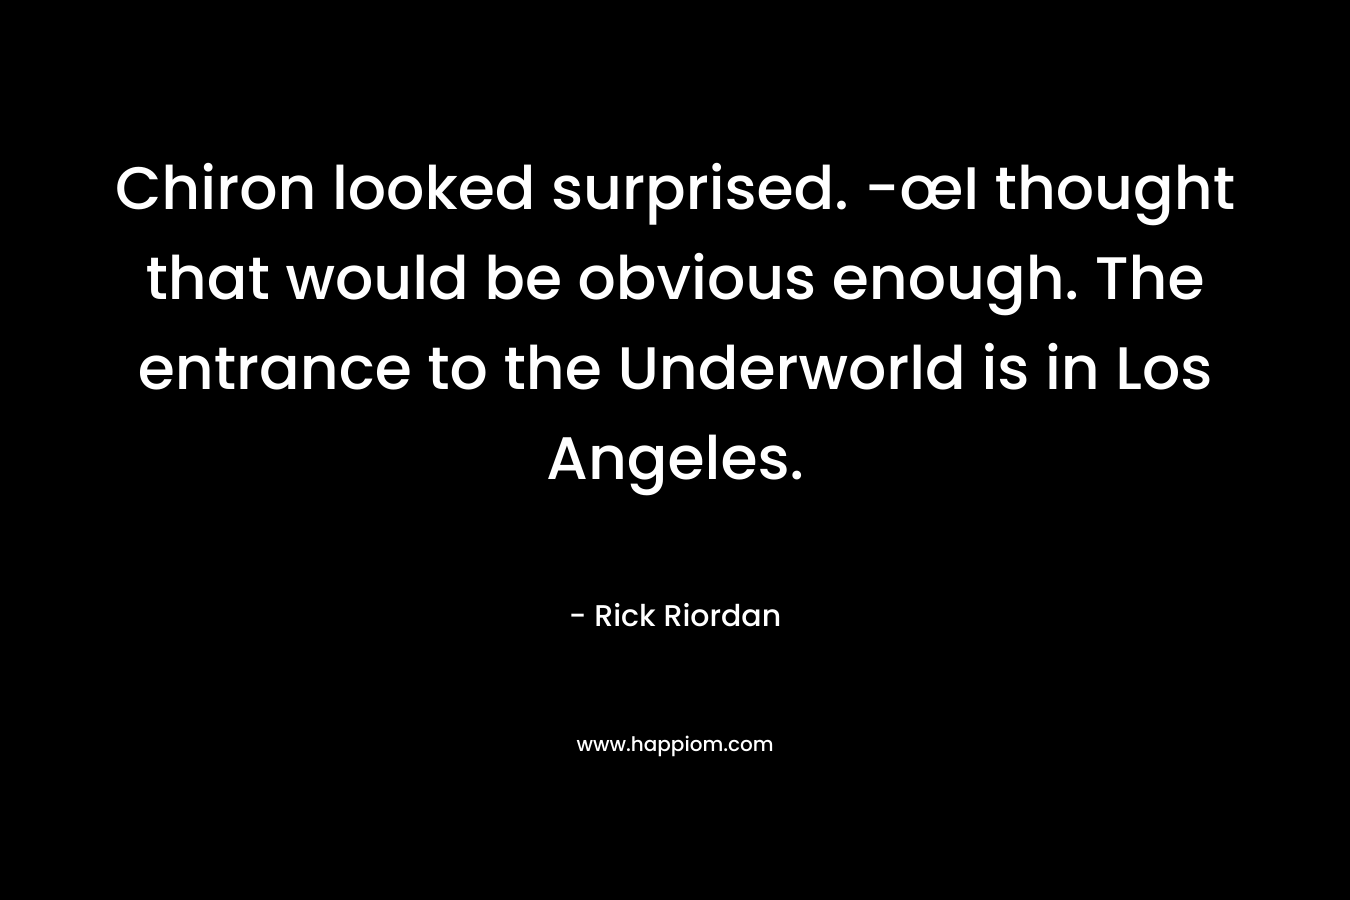 Chiron looked surprised. -œI thought that would be obvious enough. The entrance to the Underworld is in Los Angeles.